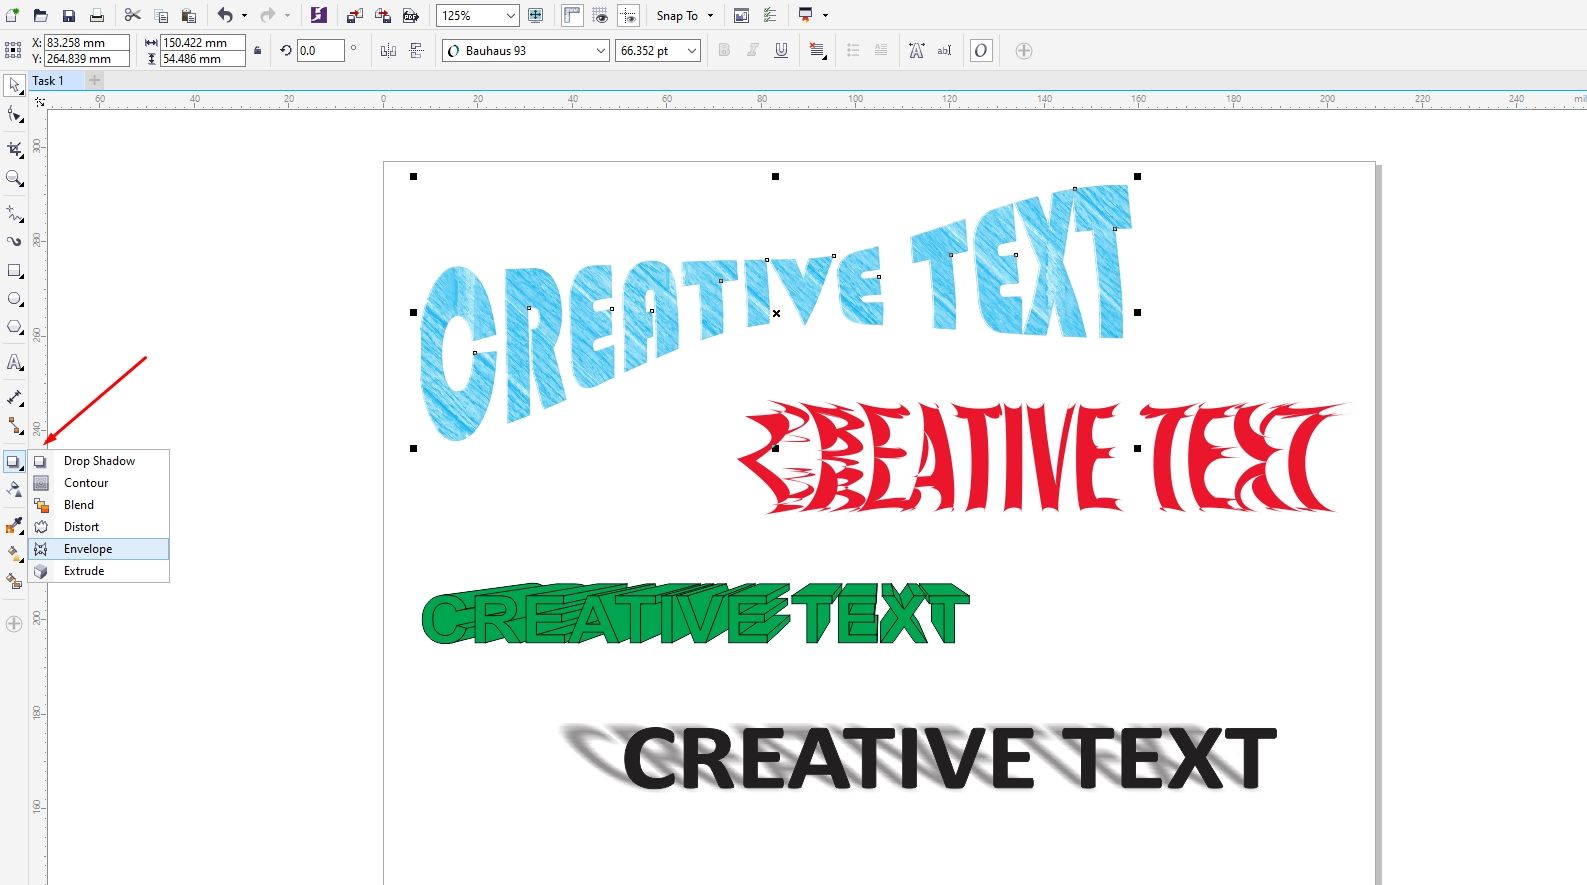 Using text in creative way